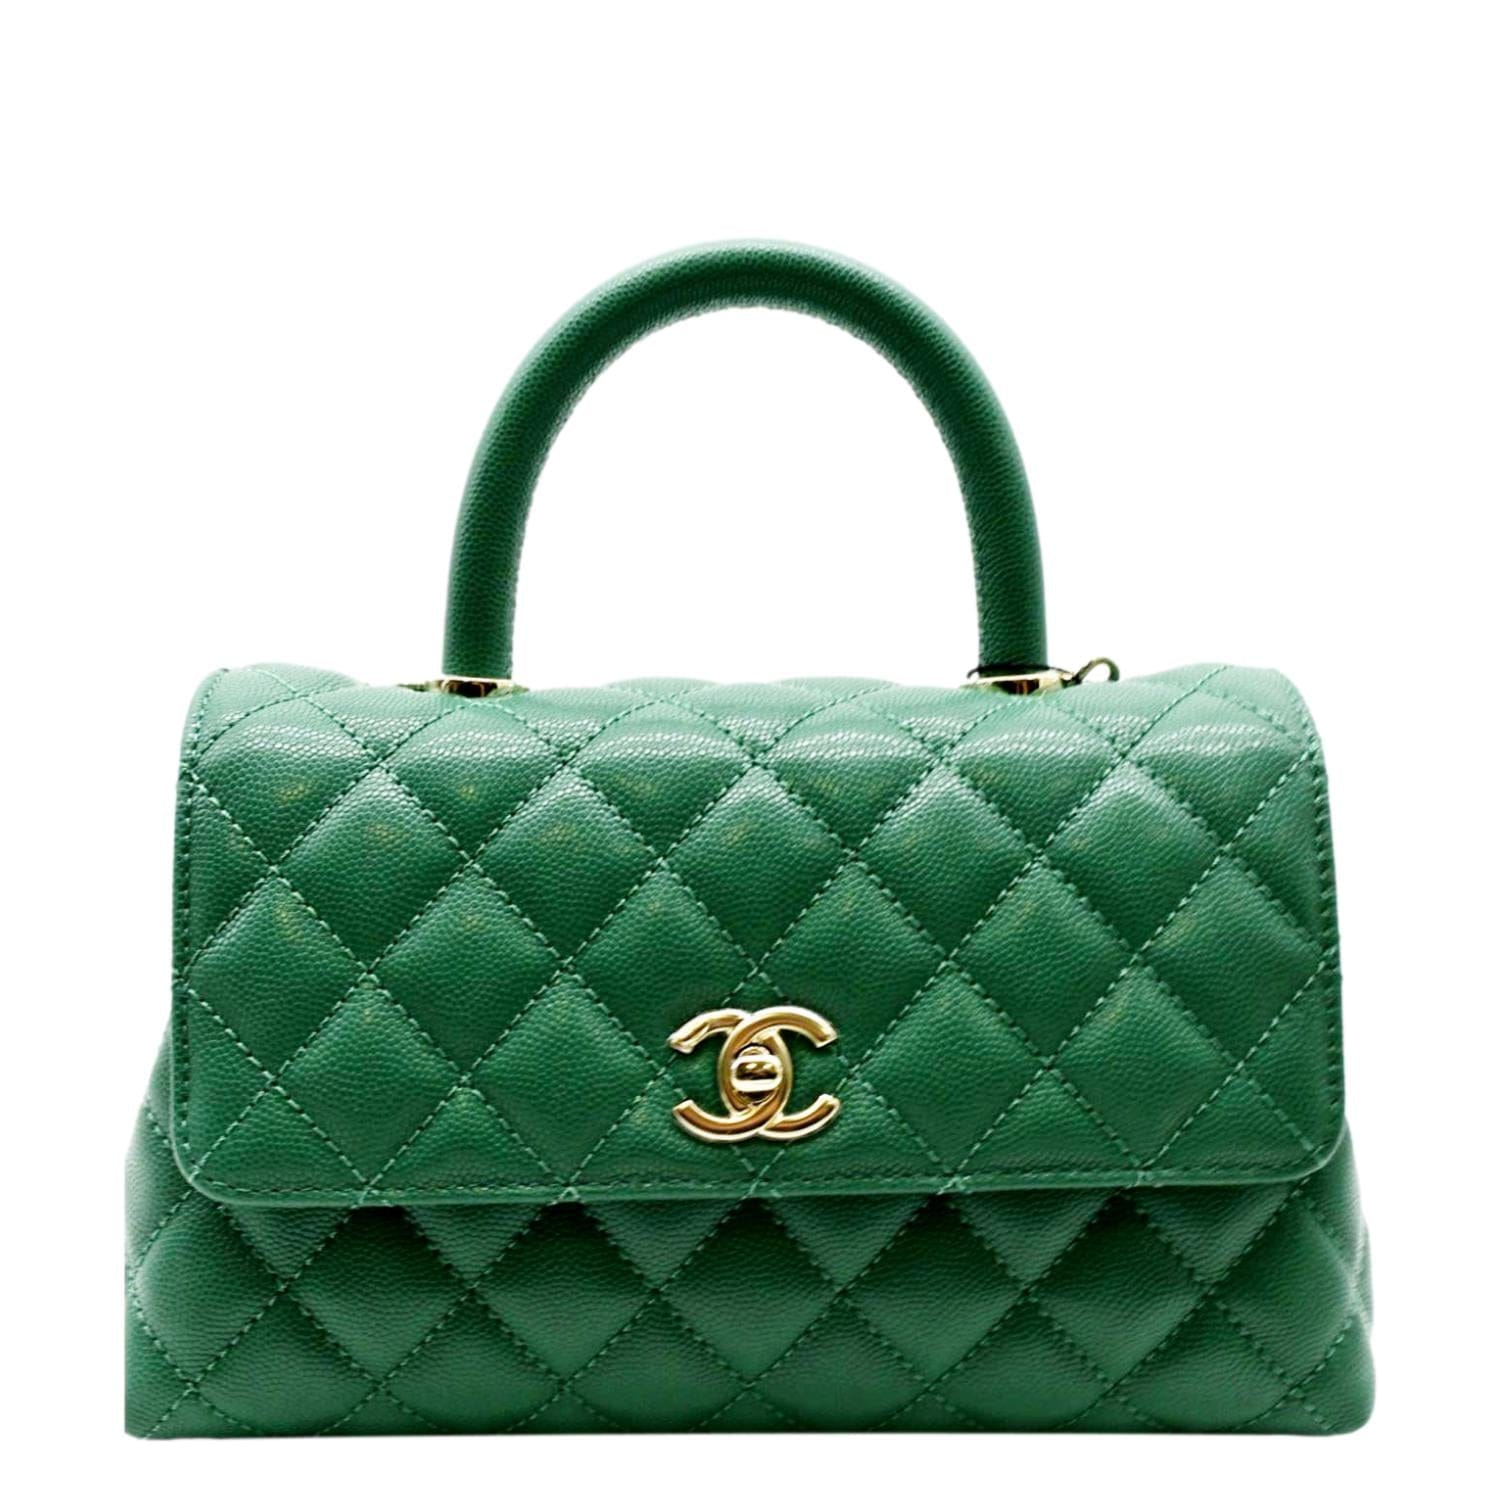 Chanel Flap bag with Top Handle (green)